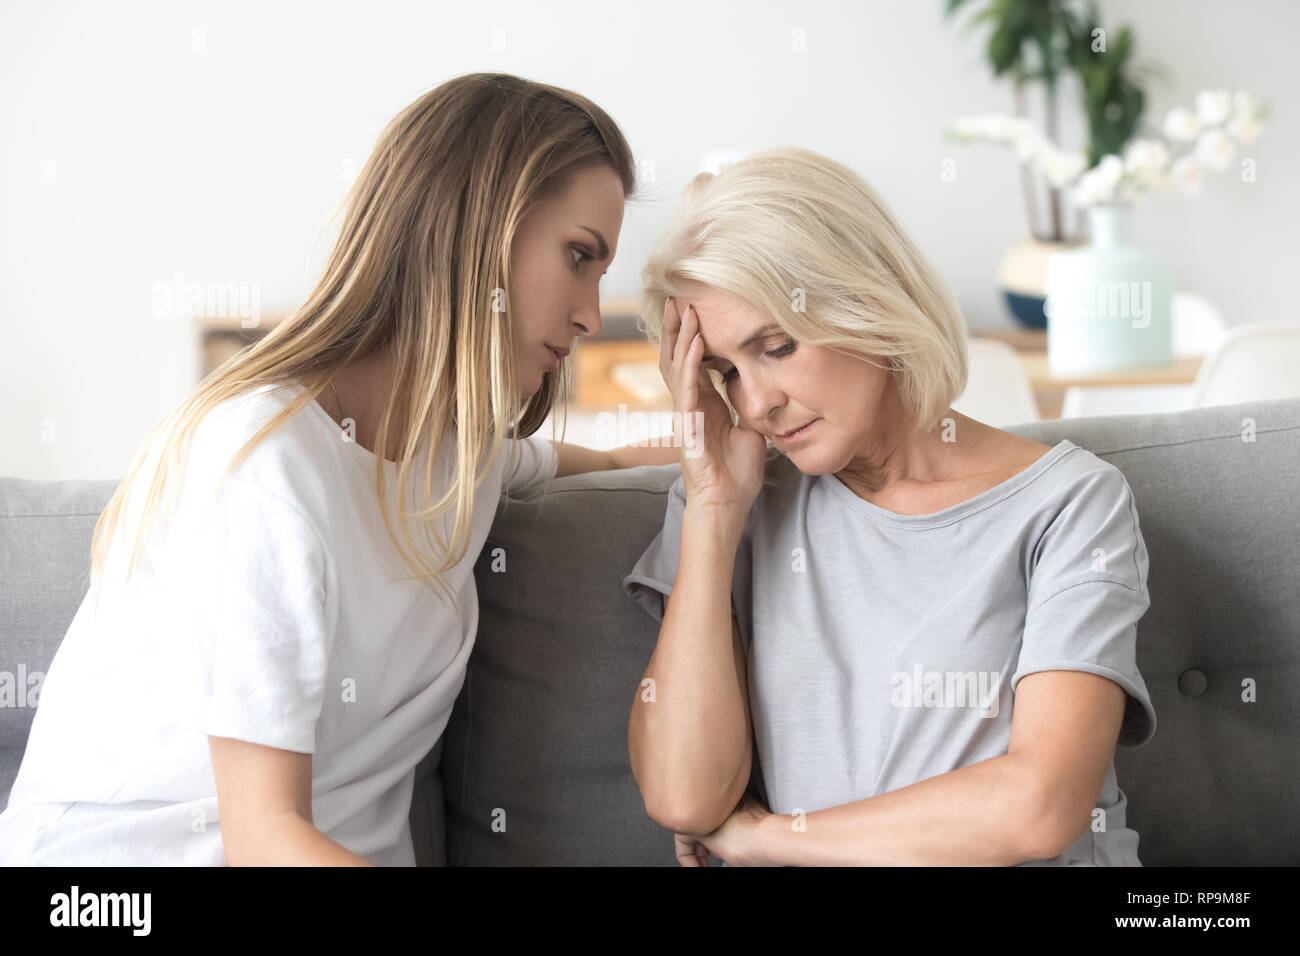 Loving daughter comforting, consoling aged upset mother at home Stock Photo